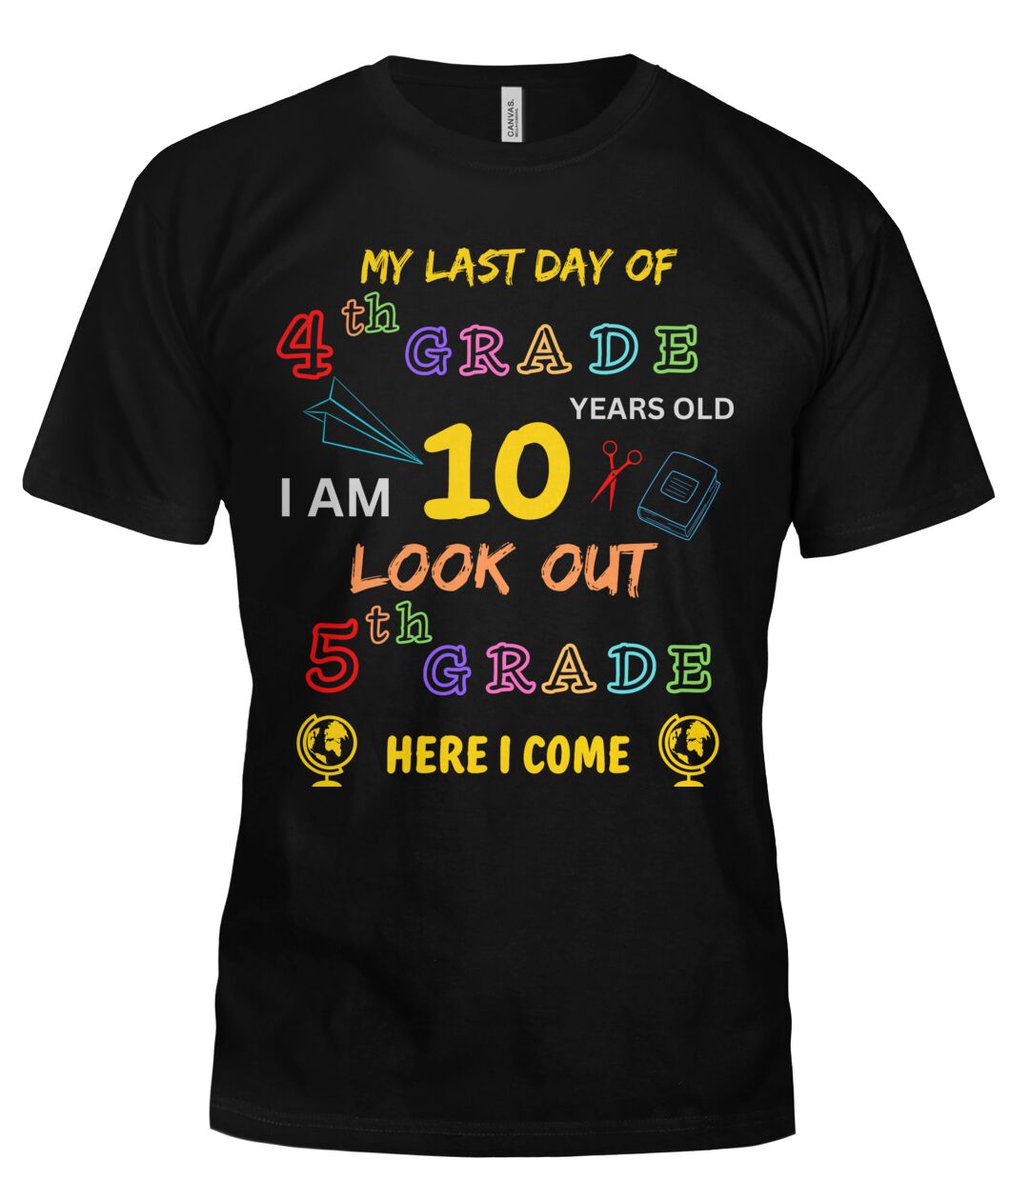 My Last Day Of 4th Grade 5th Here I Come So Long Senior Essential T-Shirt
viralstyle.com/rachid-abdo/my…
#graduation #graduationgift #graduationday #makeupgraduation #graduationmakeup #kadograduation #graduationdoll #graduationbouquet #graduationparty